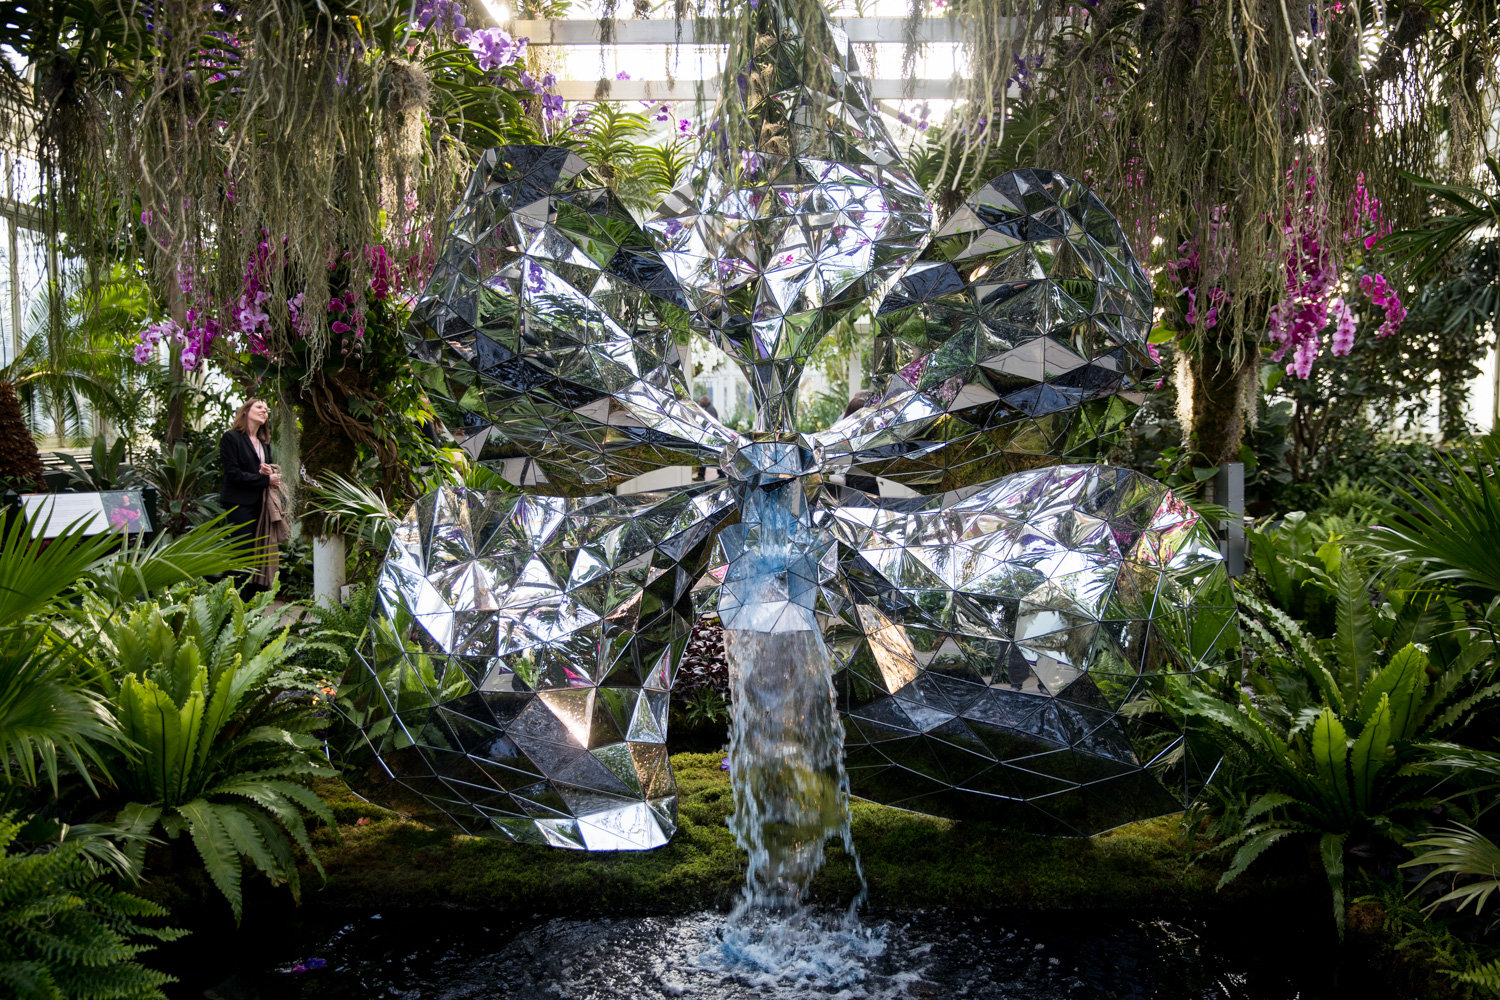 A mirrored sculpture reflects the surrounding orchid displays  at the New York Botanical Garden, on display through April 19.